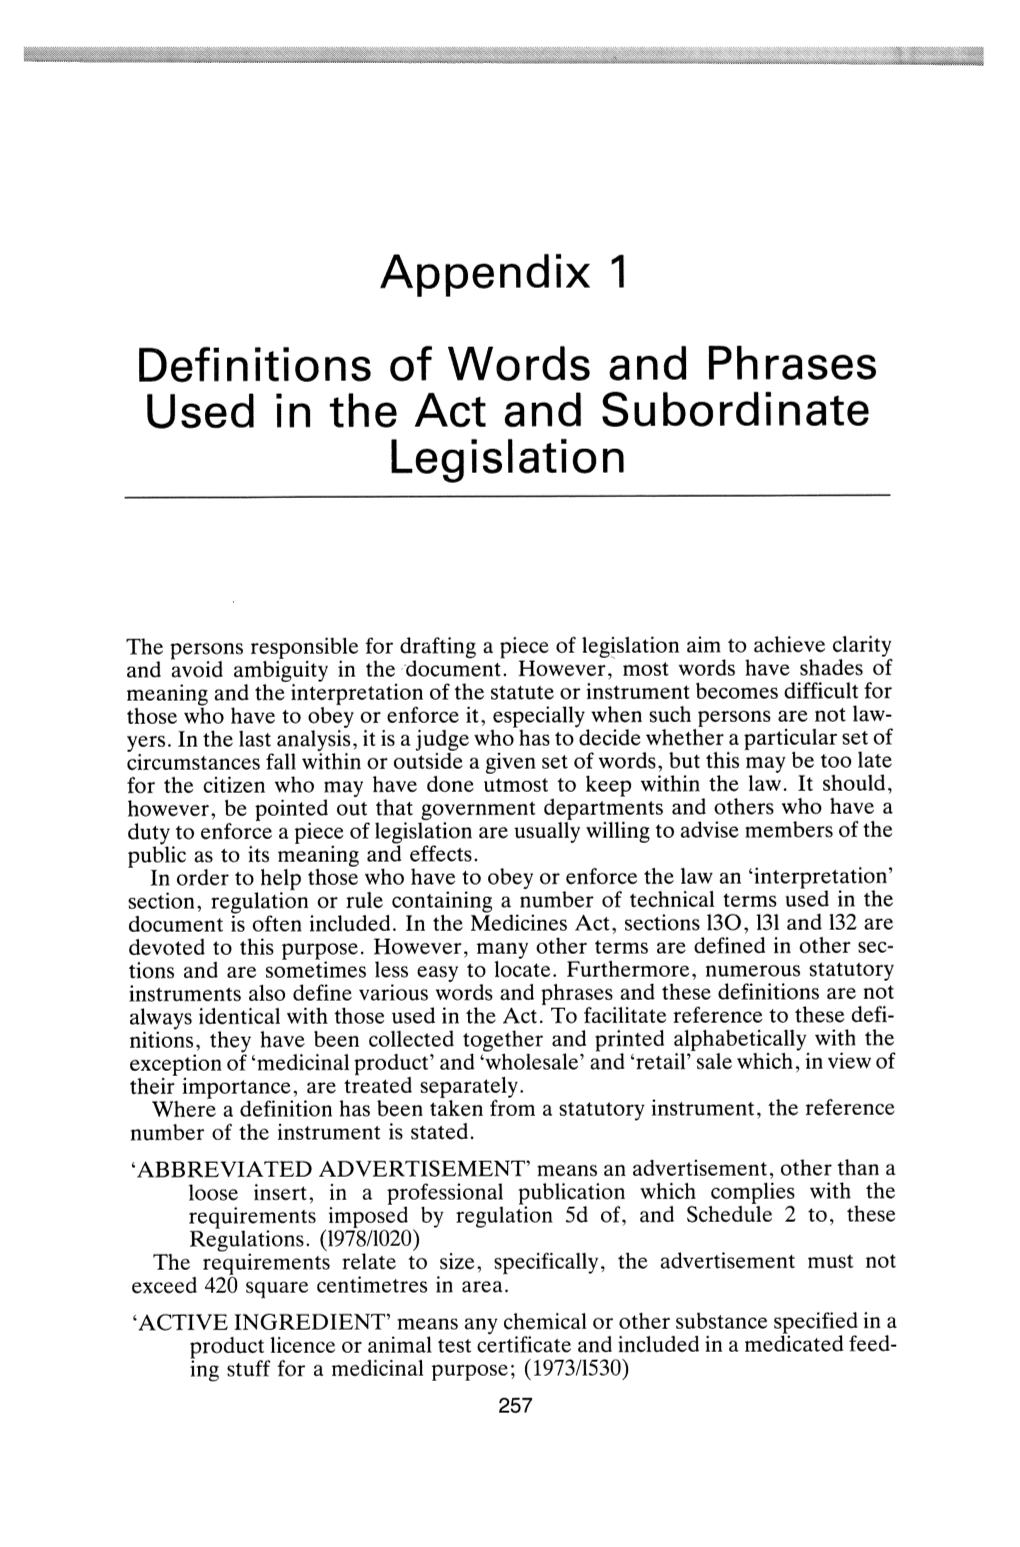 Appendix 1 Definitions of Words and Phrases Used in the Act And